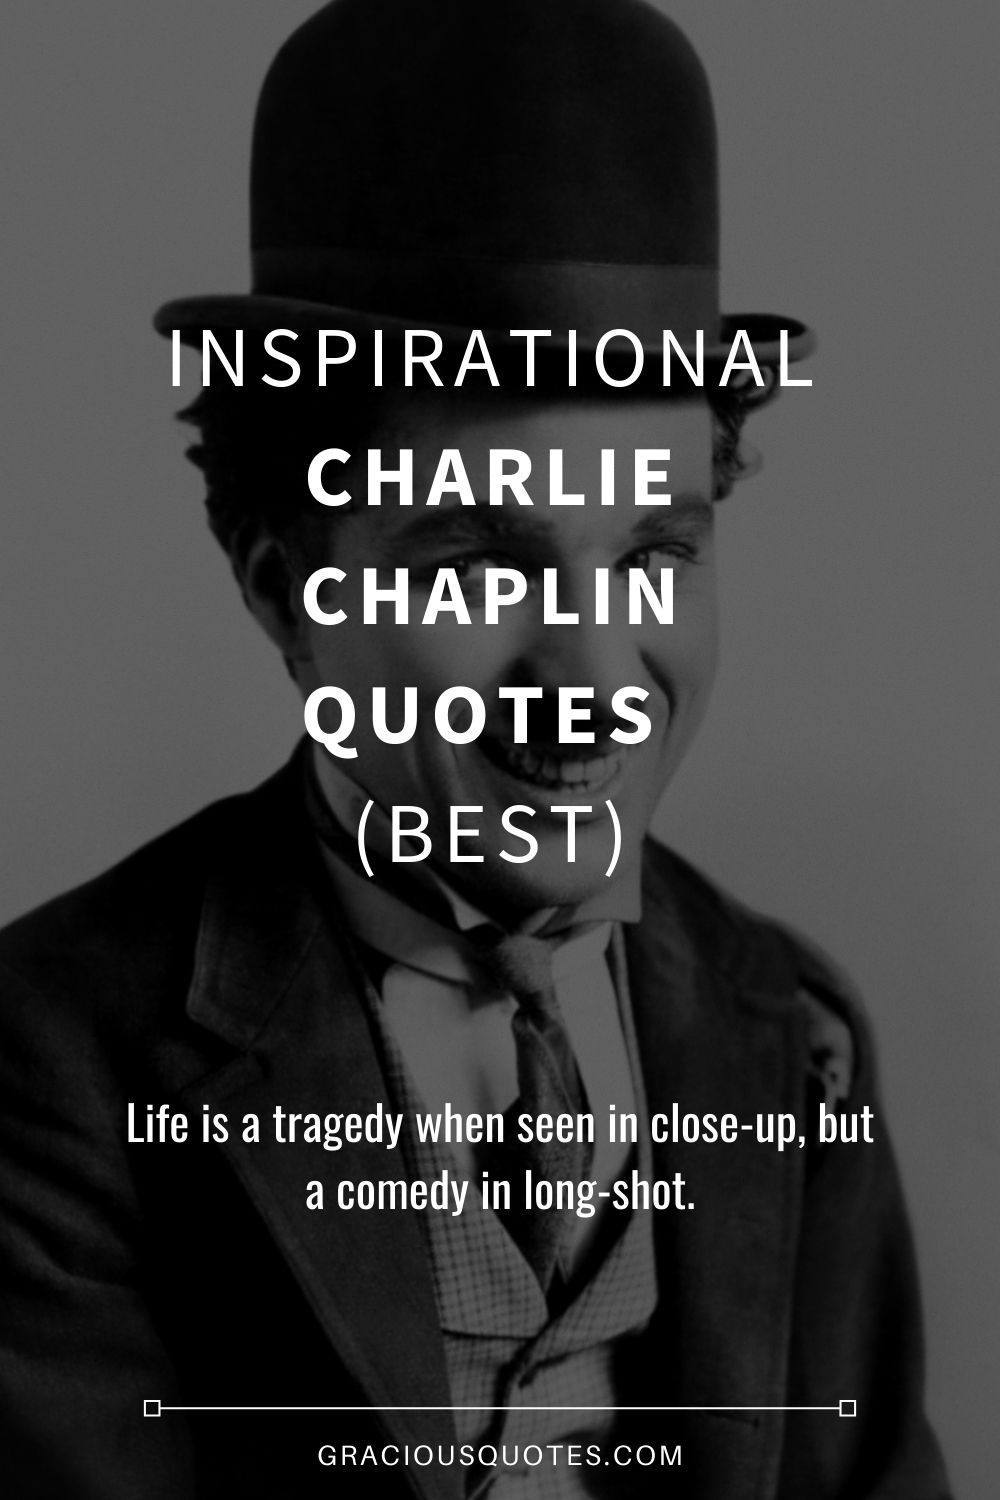 Inspirational Charlie Chaplin Quotes (BEST) - Gracious Quotes